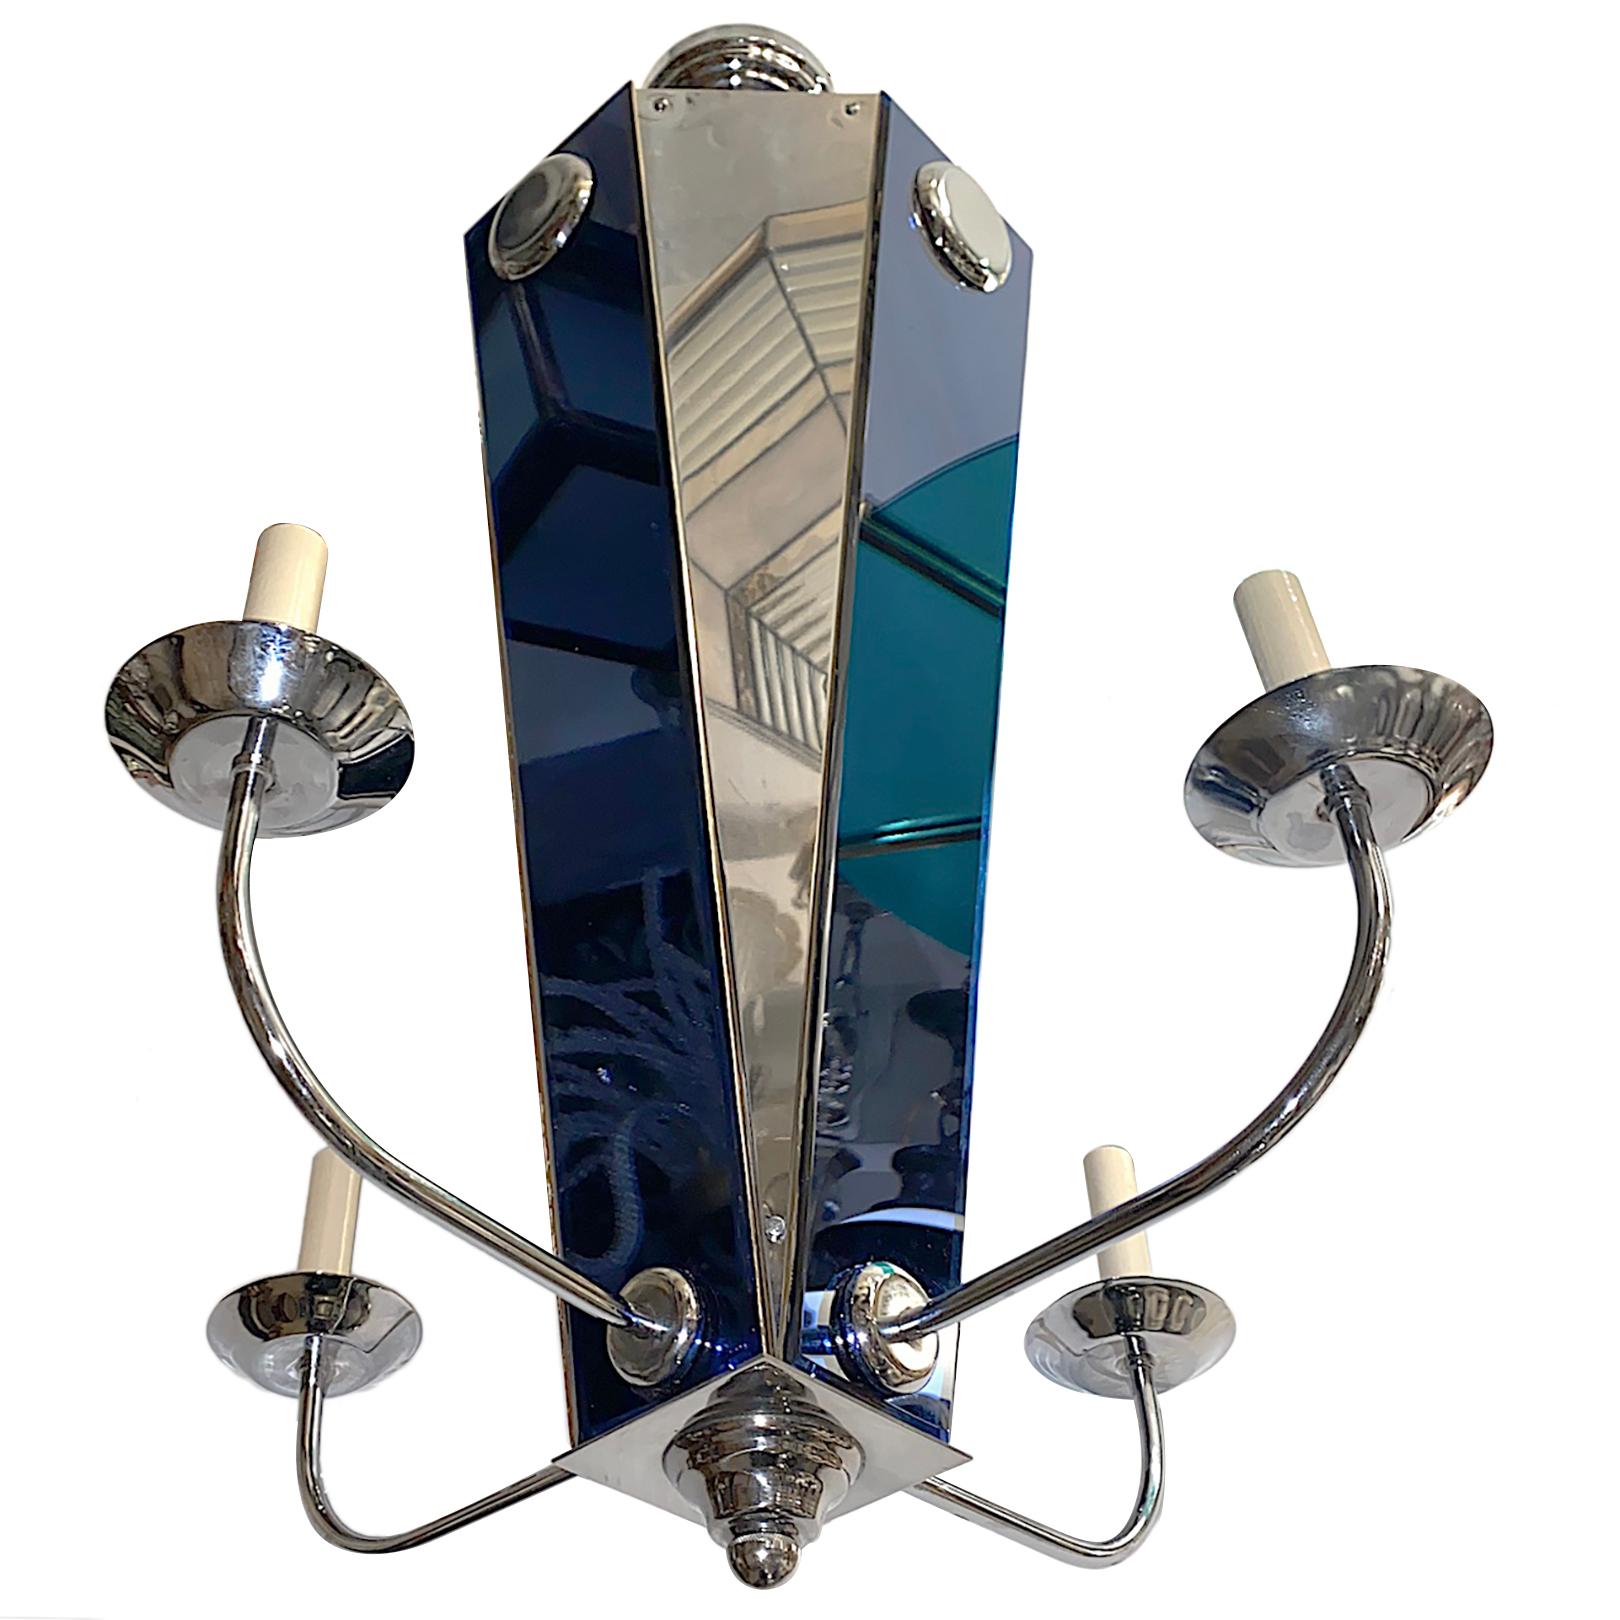 A set of nine circa 1950s French Art Deco style chandeliers with cobalt mirror insets. Sold individually.

Measurements:
Height 36